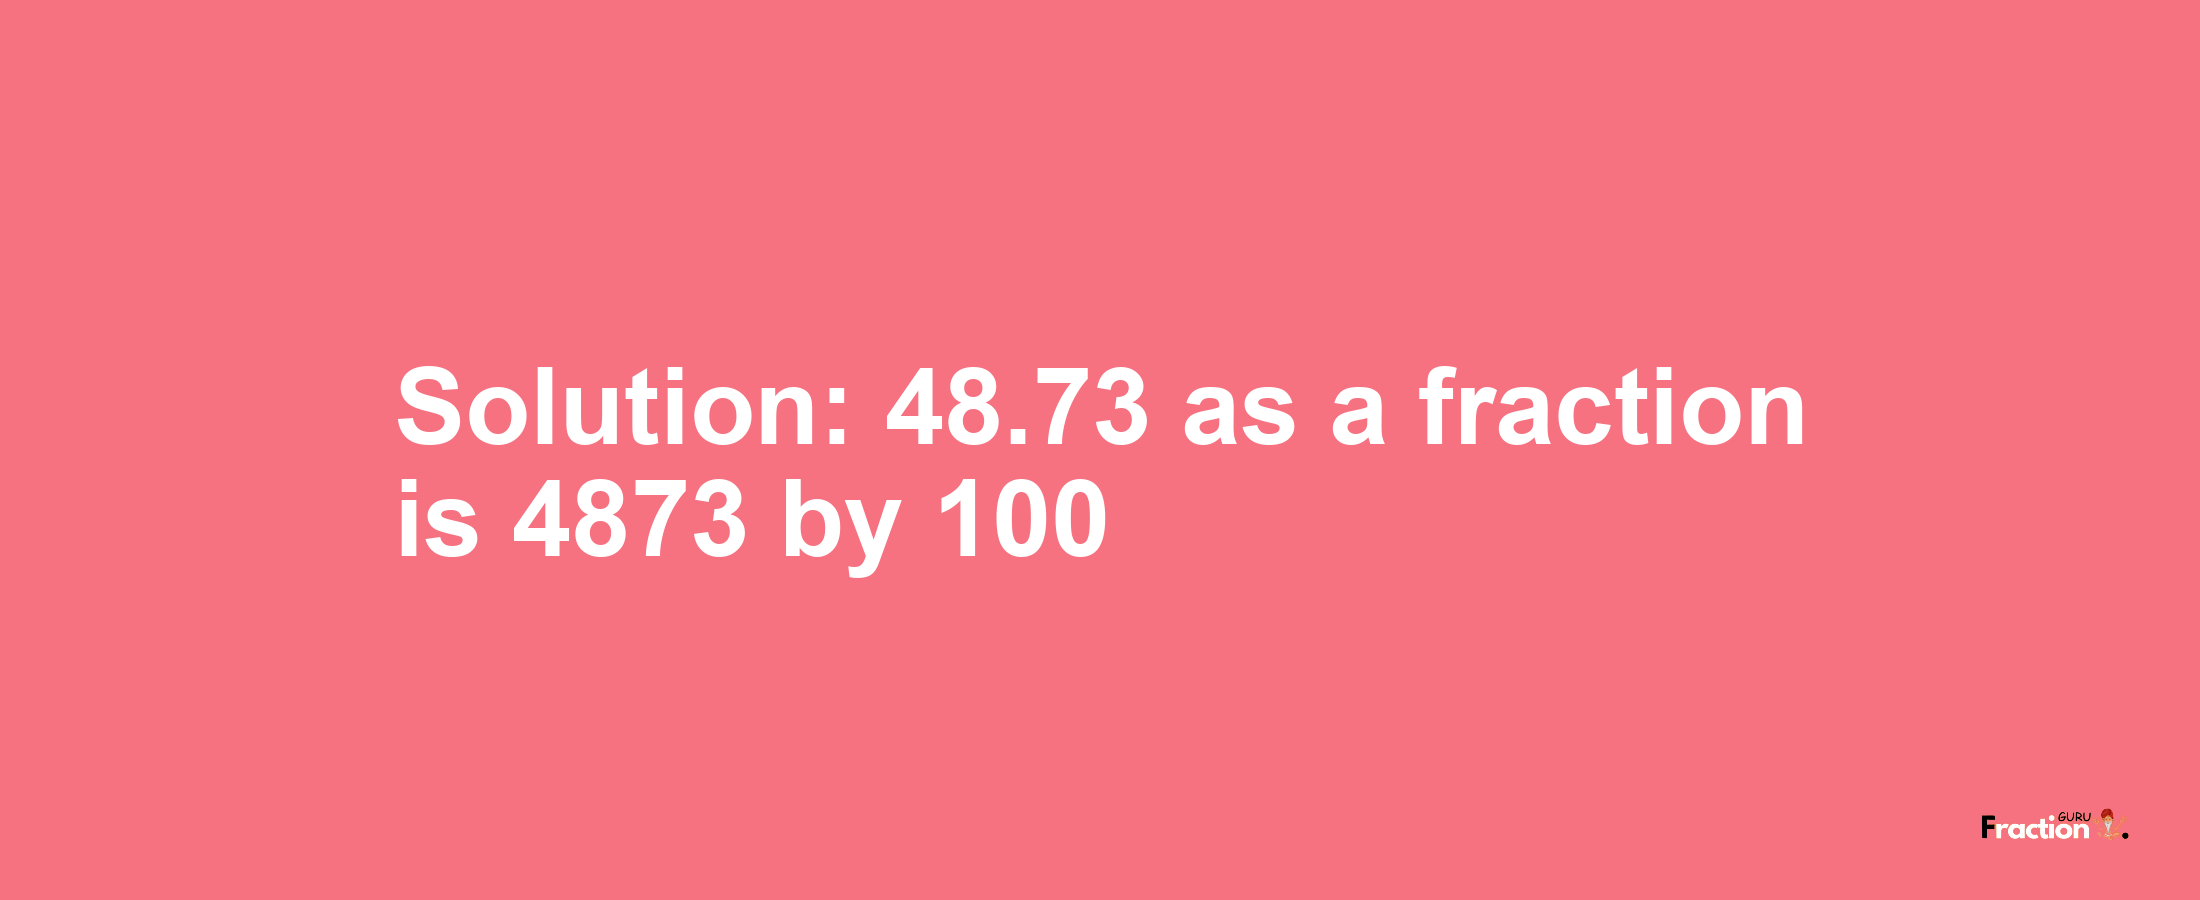 Solution:48.73 as a fraction is 4873/100